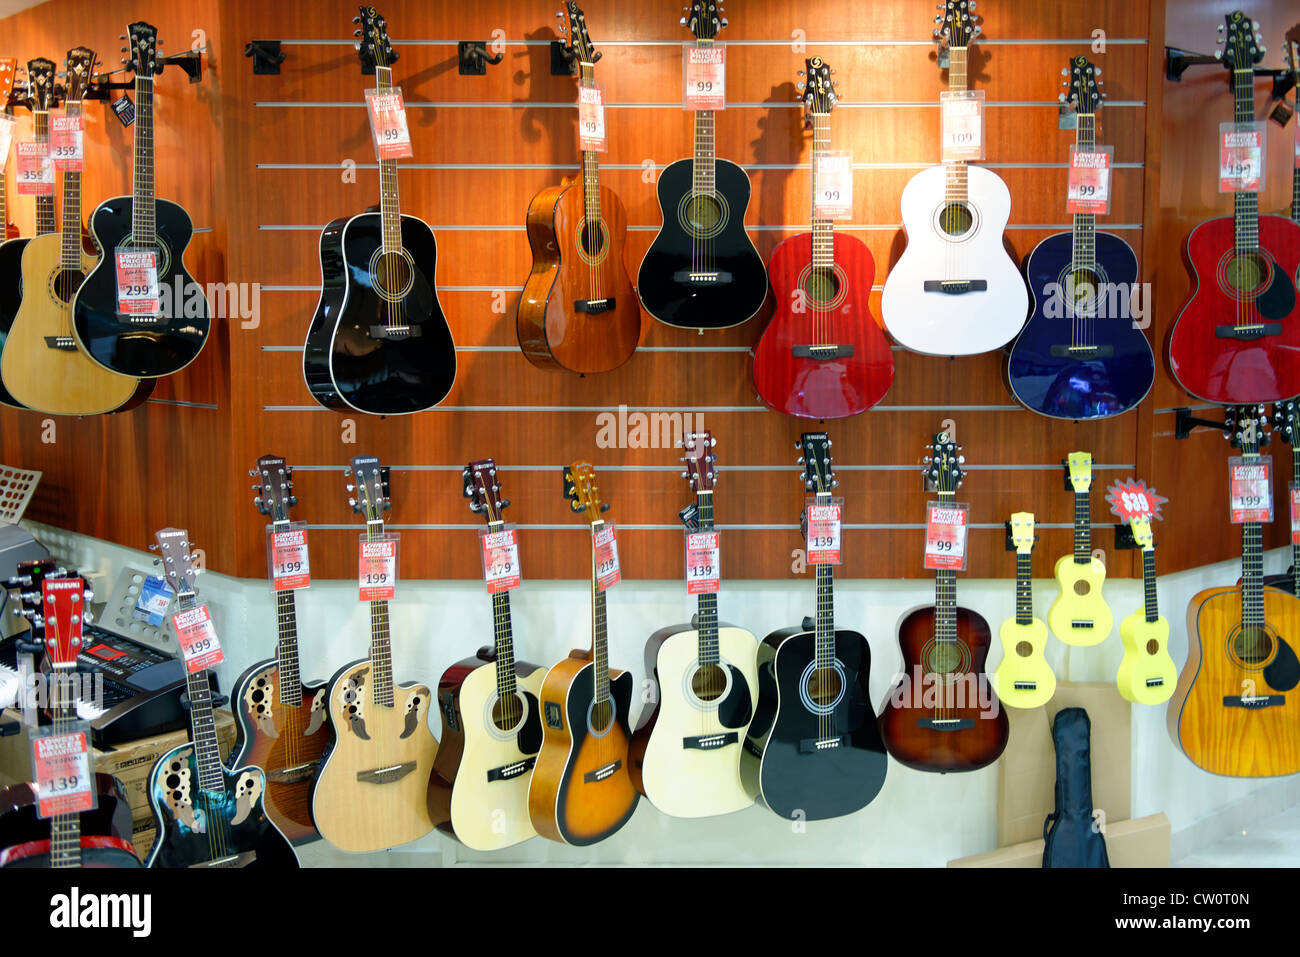 Rows of guitars in a Singapore shop Stock Photo: 49805973 - Alamy